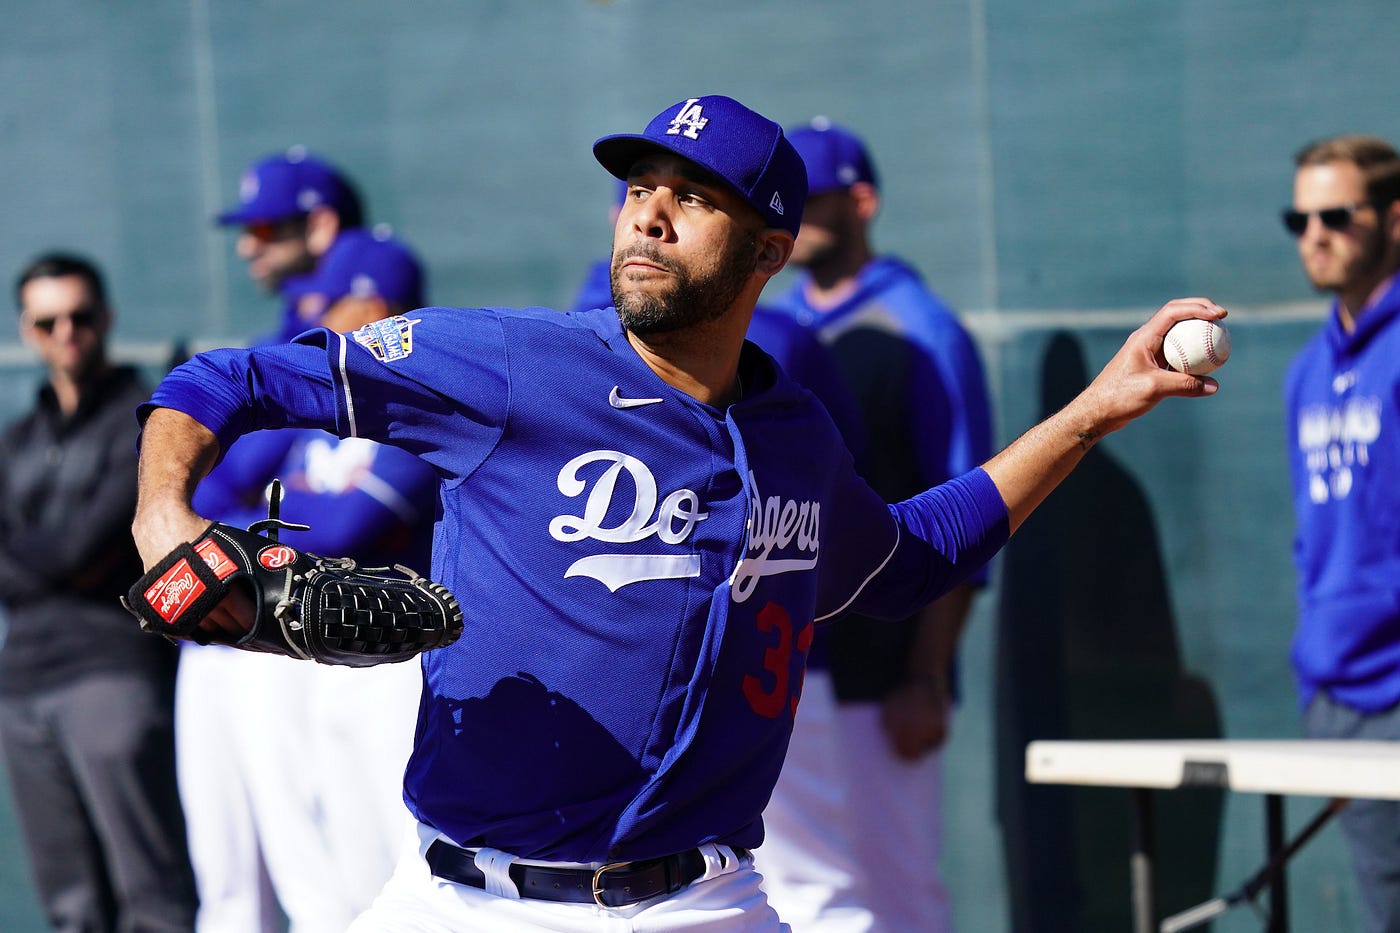 David Prices journey to the Dodgers is a full-circle story by Cary Osborne Dodger Insider